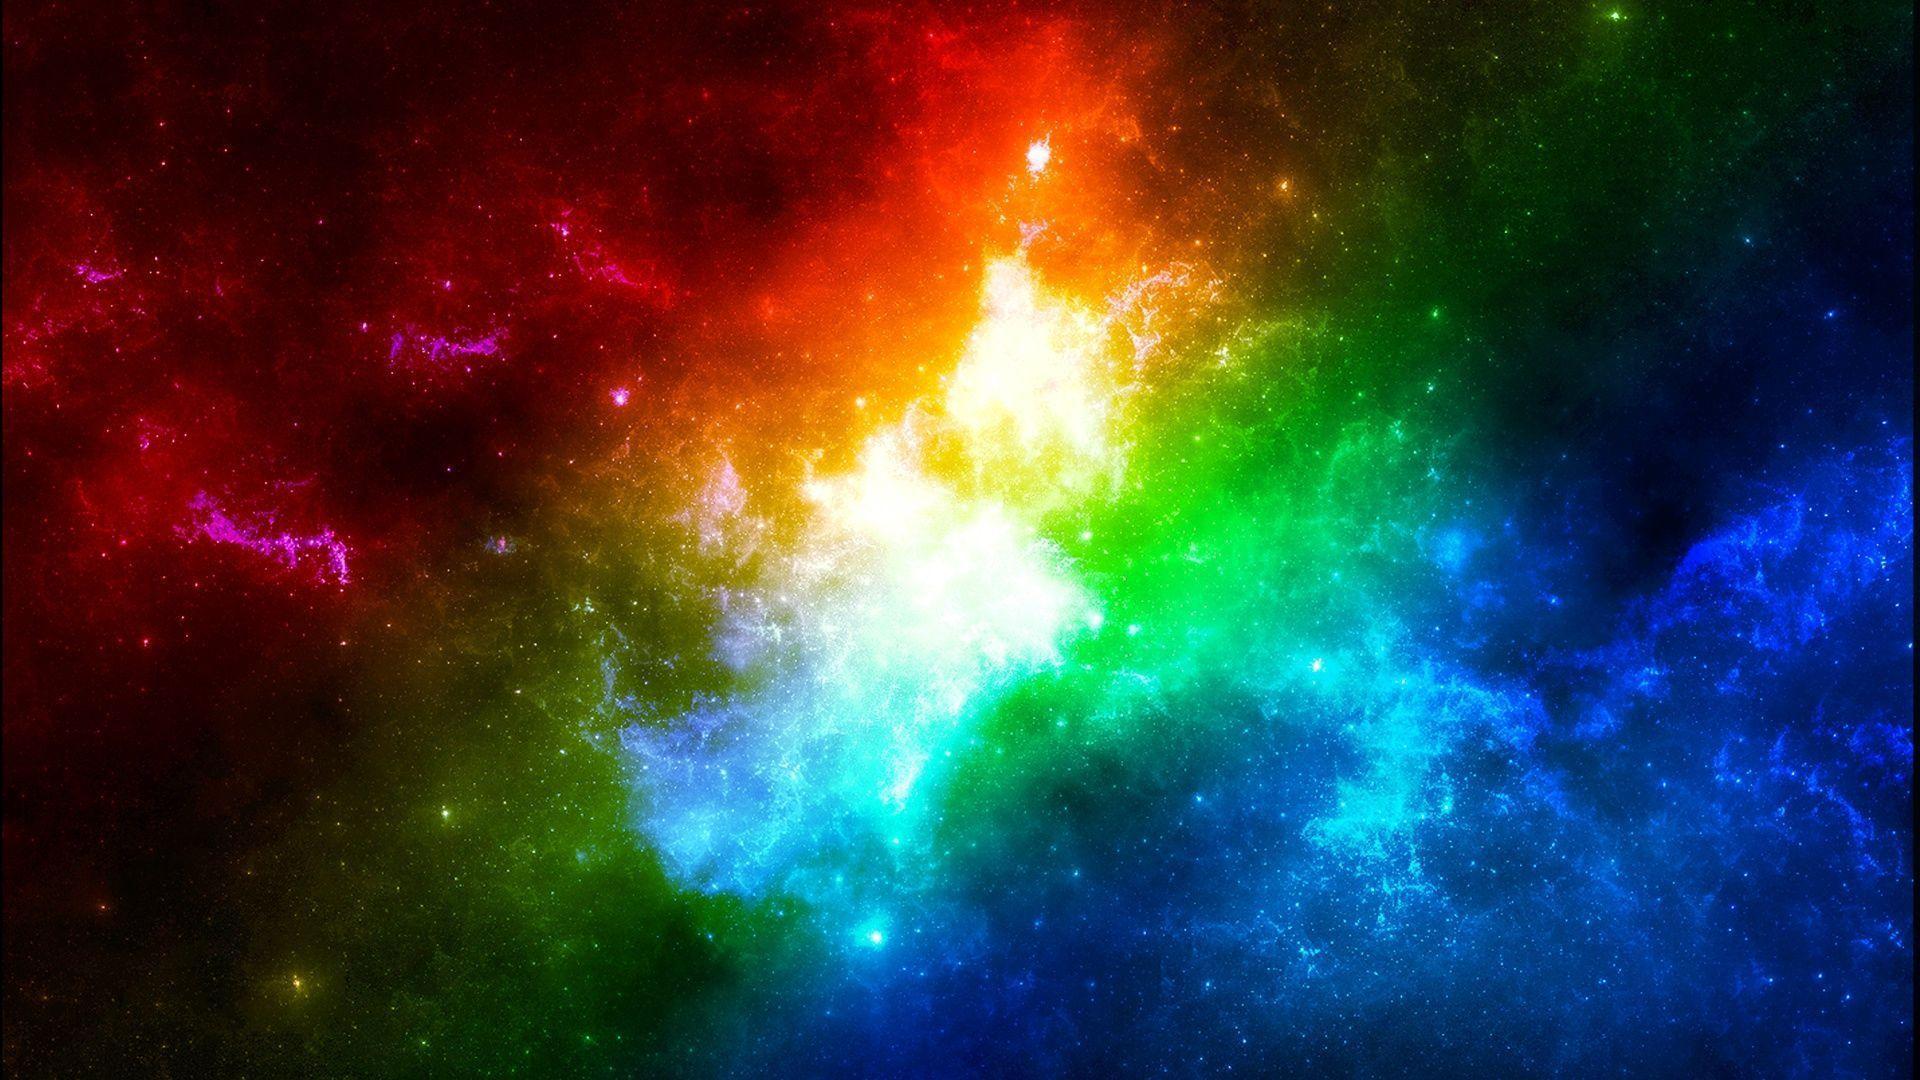 Wallpaper Space in Rainbow Colors 1920x1080PX Wallpaper Rainbow